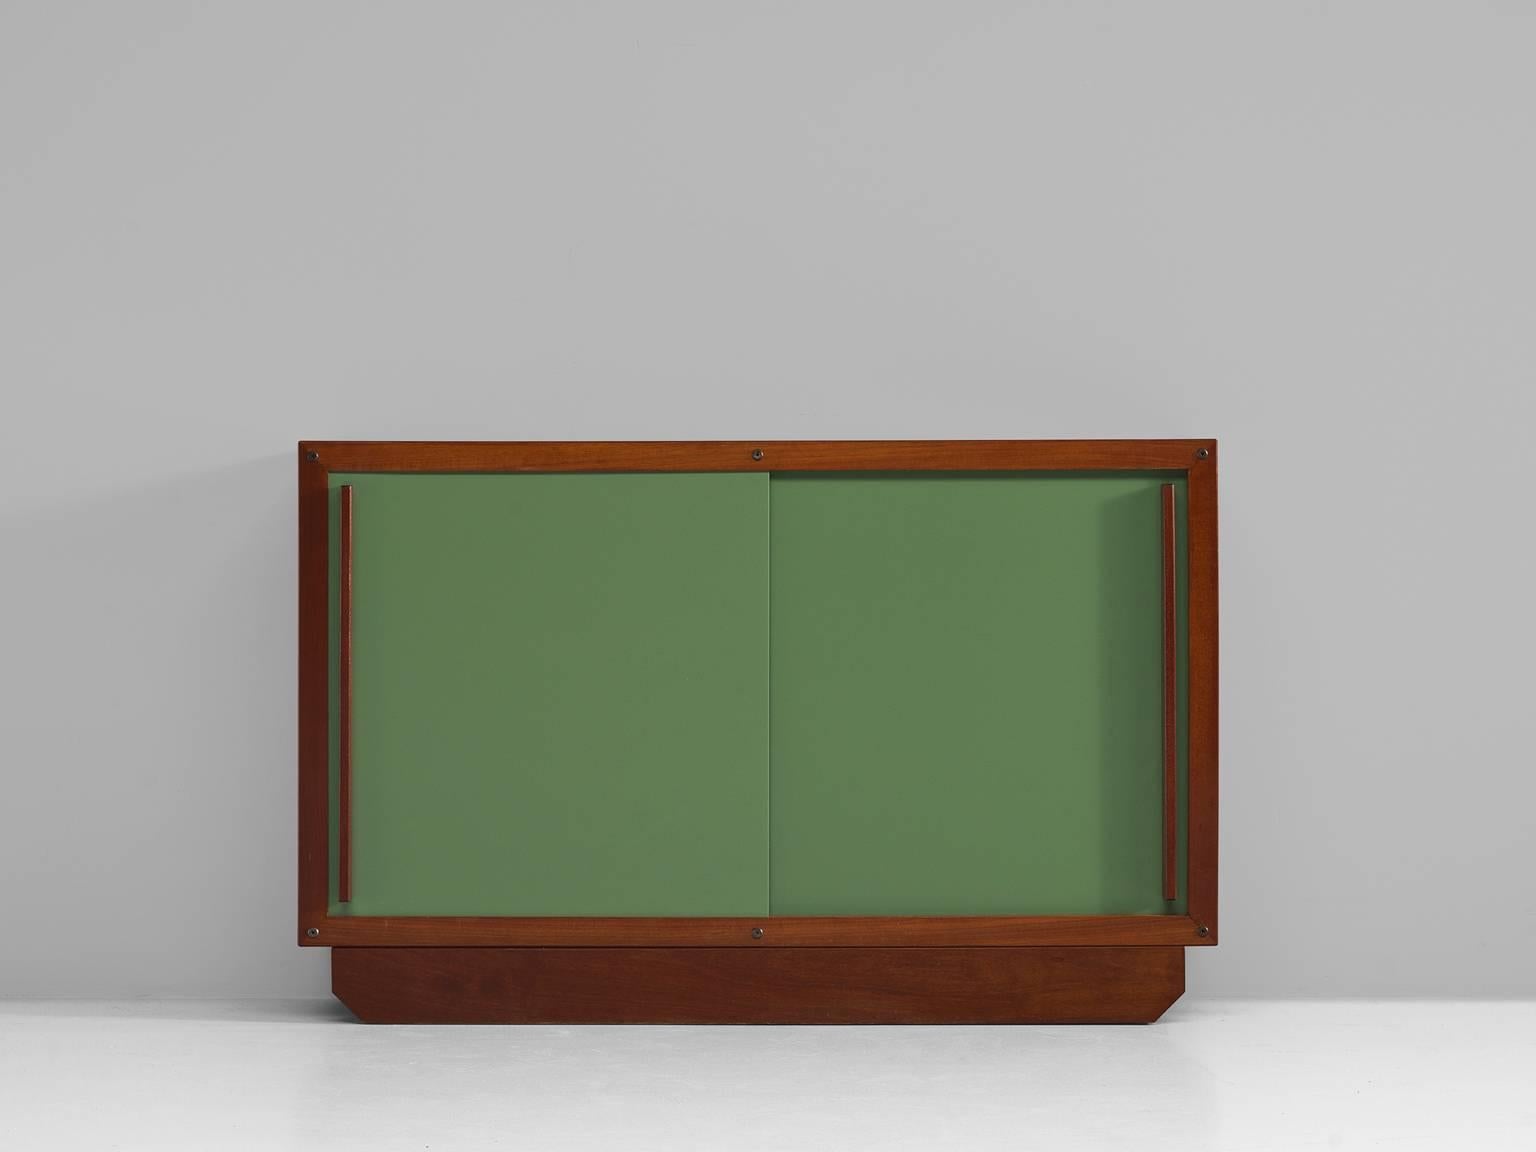 Cabinet with two sliding doors, plywood and teak, France, 1950s

Small cabinet with two doors that slide open. The design forms a playful and versatile piece of furniture resting on a sled base. Very simple clean design that is highly original. The